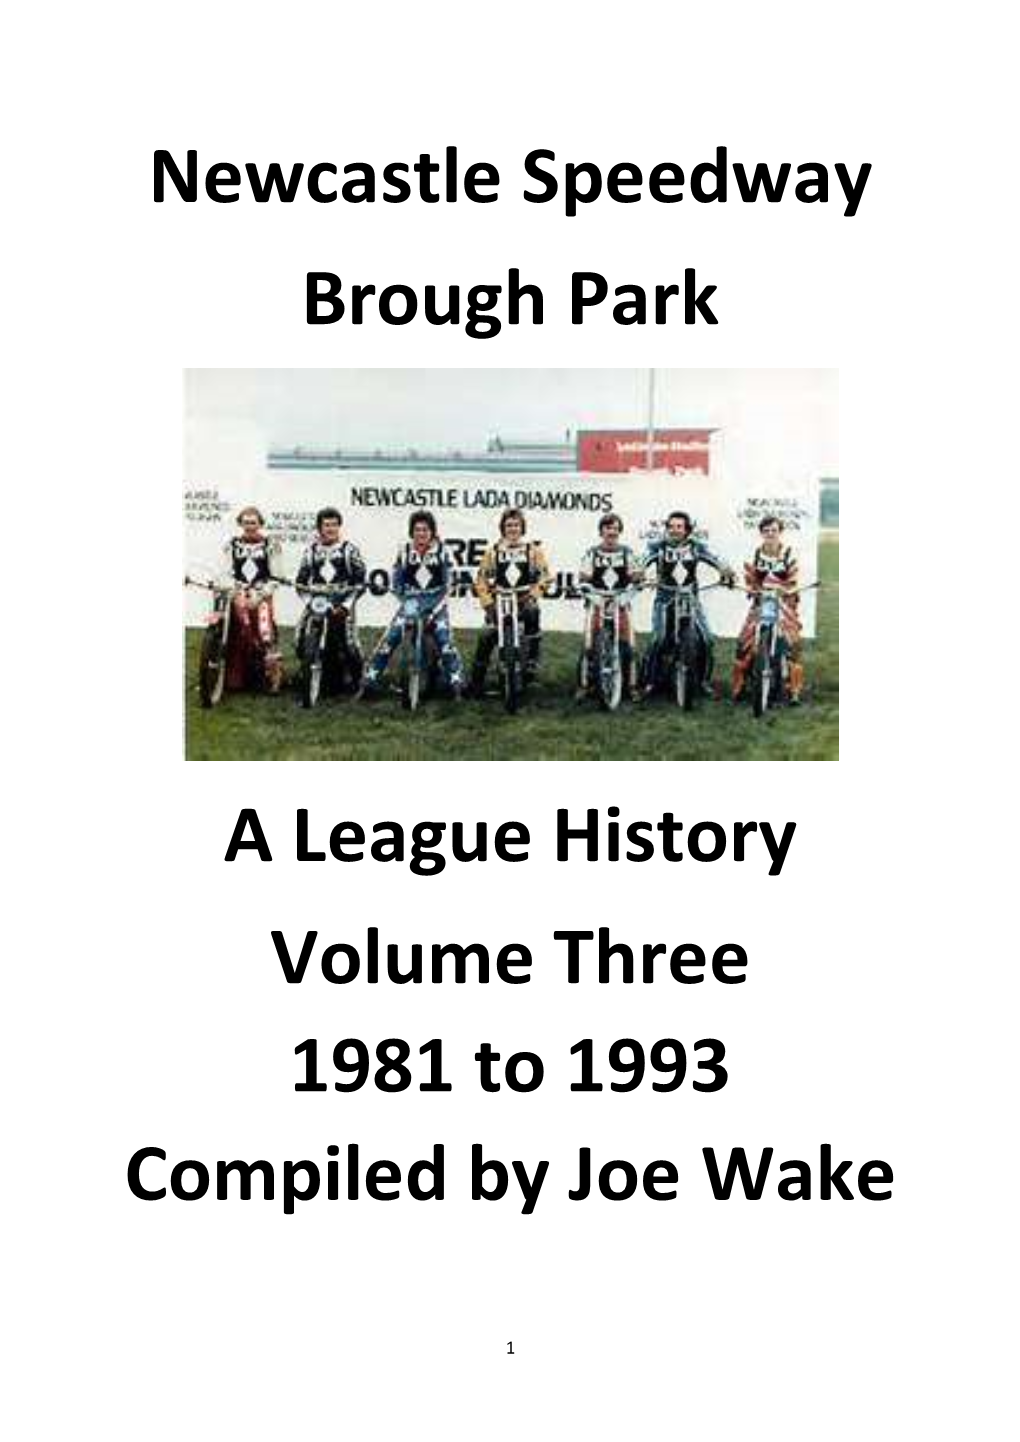 Newcastle Speedway Brough Park a League History Volume Three 1981